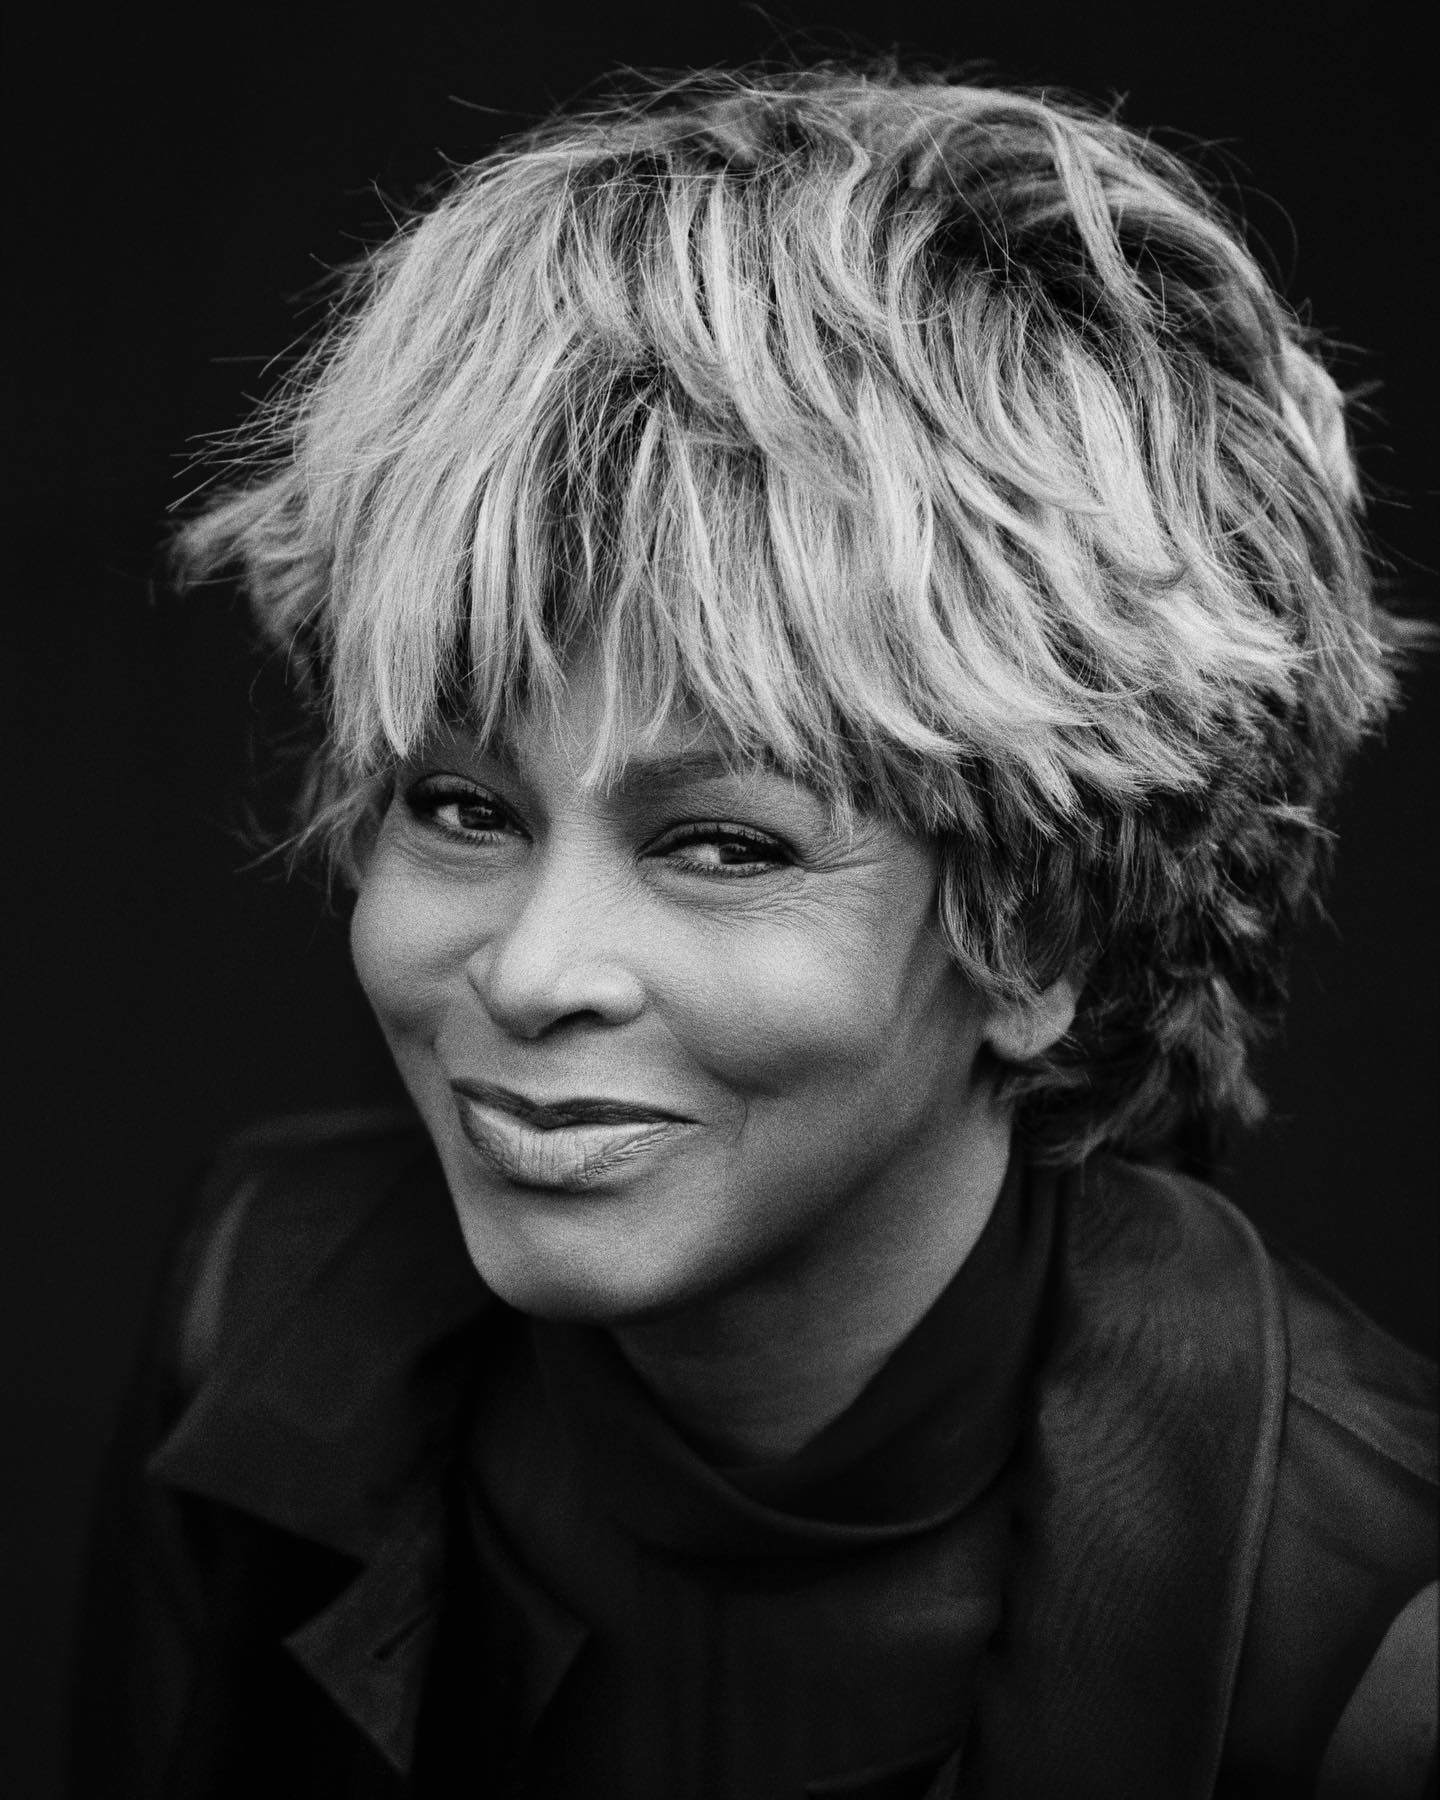 Photo by Tina Turner on May 24 2023. May be a black and white image of 1 person blonde hair makeup and